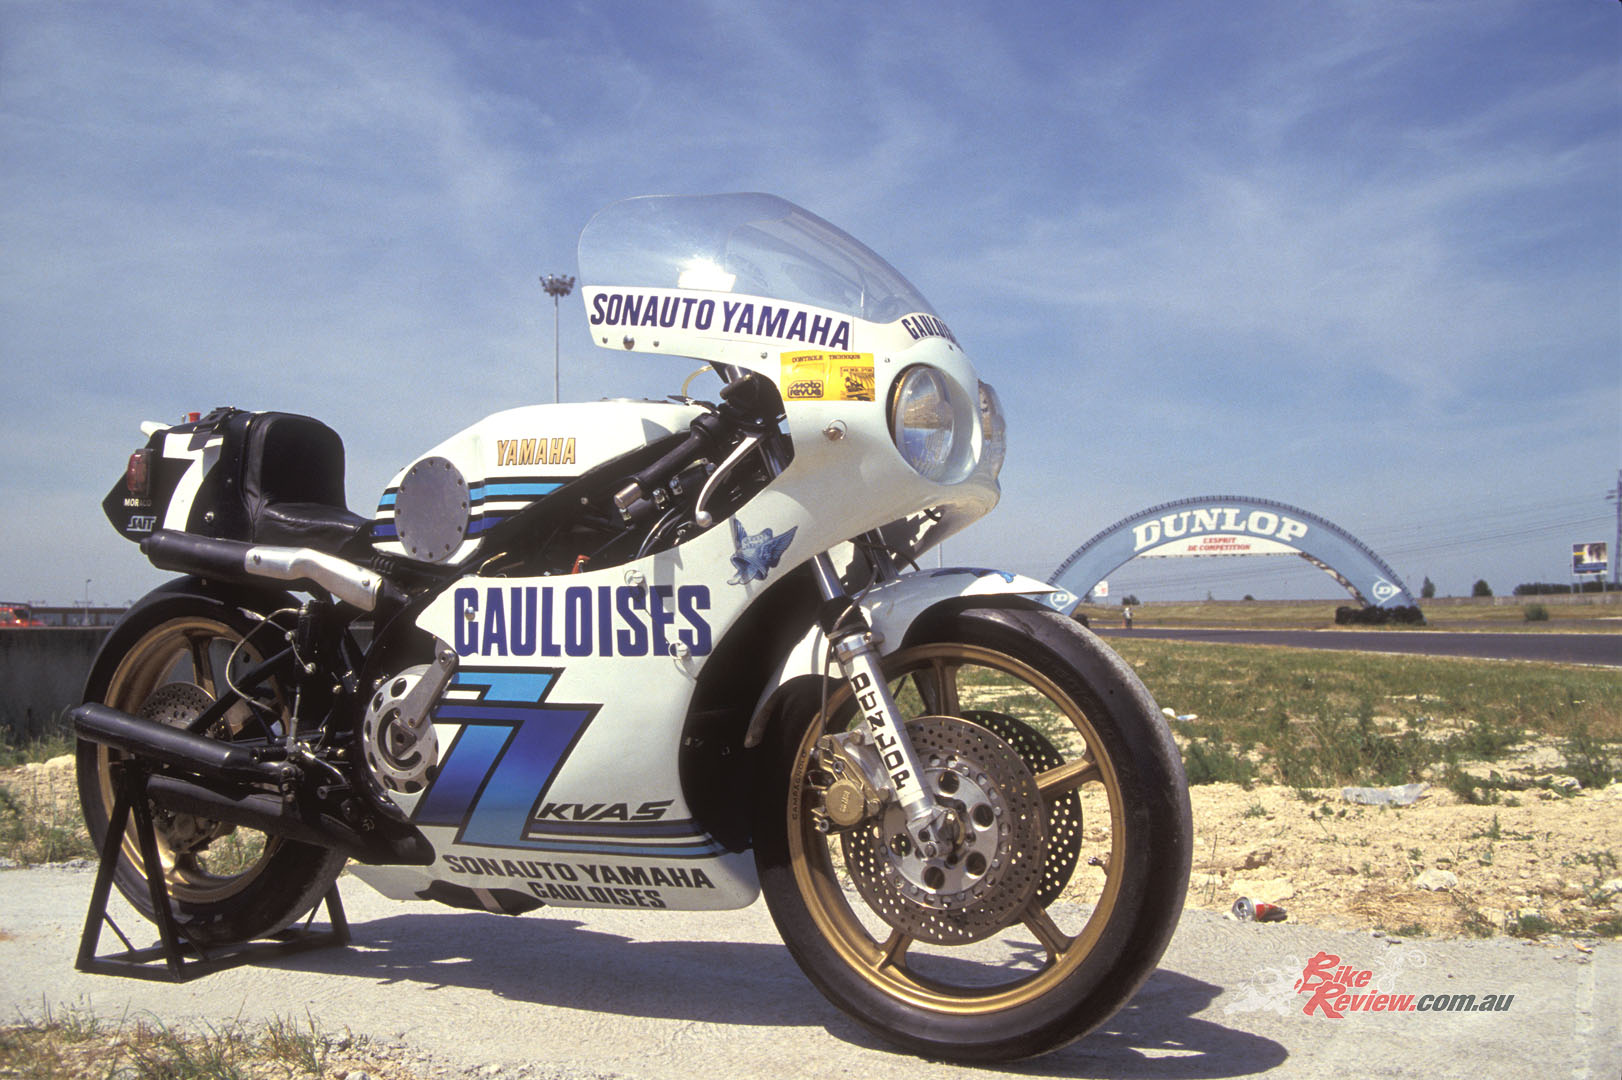 Yet 40+ years ago, that's exactly what Sonauto Yamaha boss Jean-Claude Olivier tried to do - to win the Bol d'Or with a TZ750 Yamaha GP racer. It almost worked...